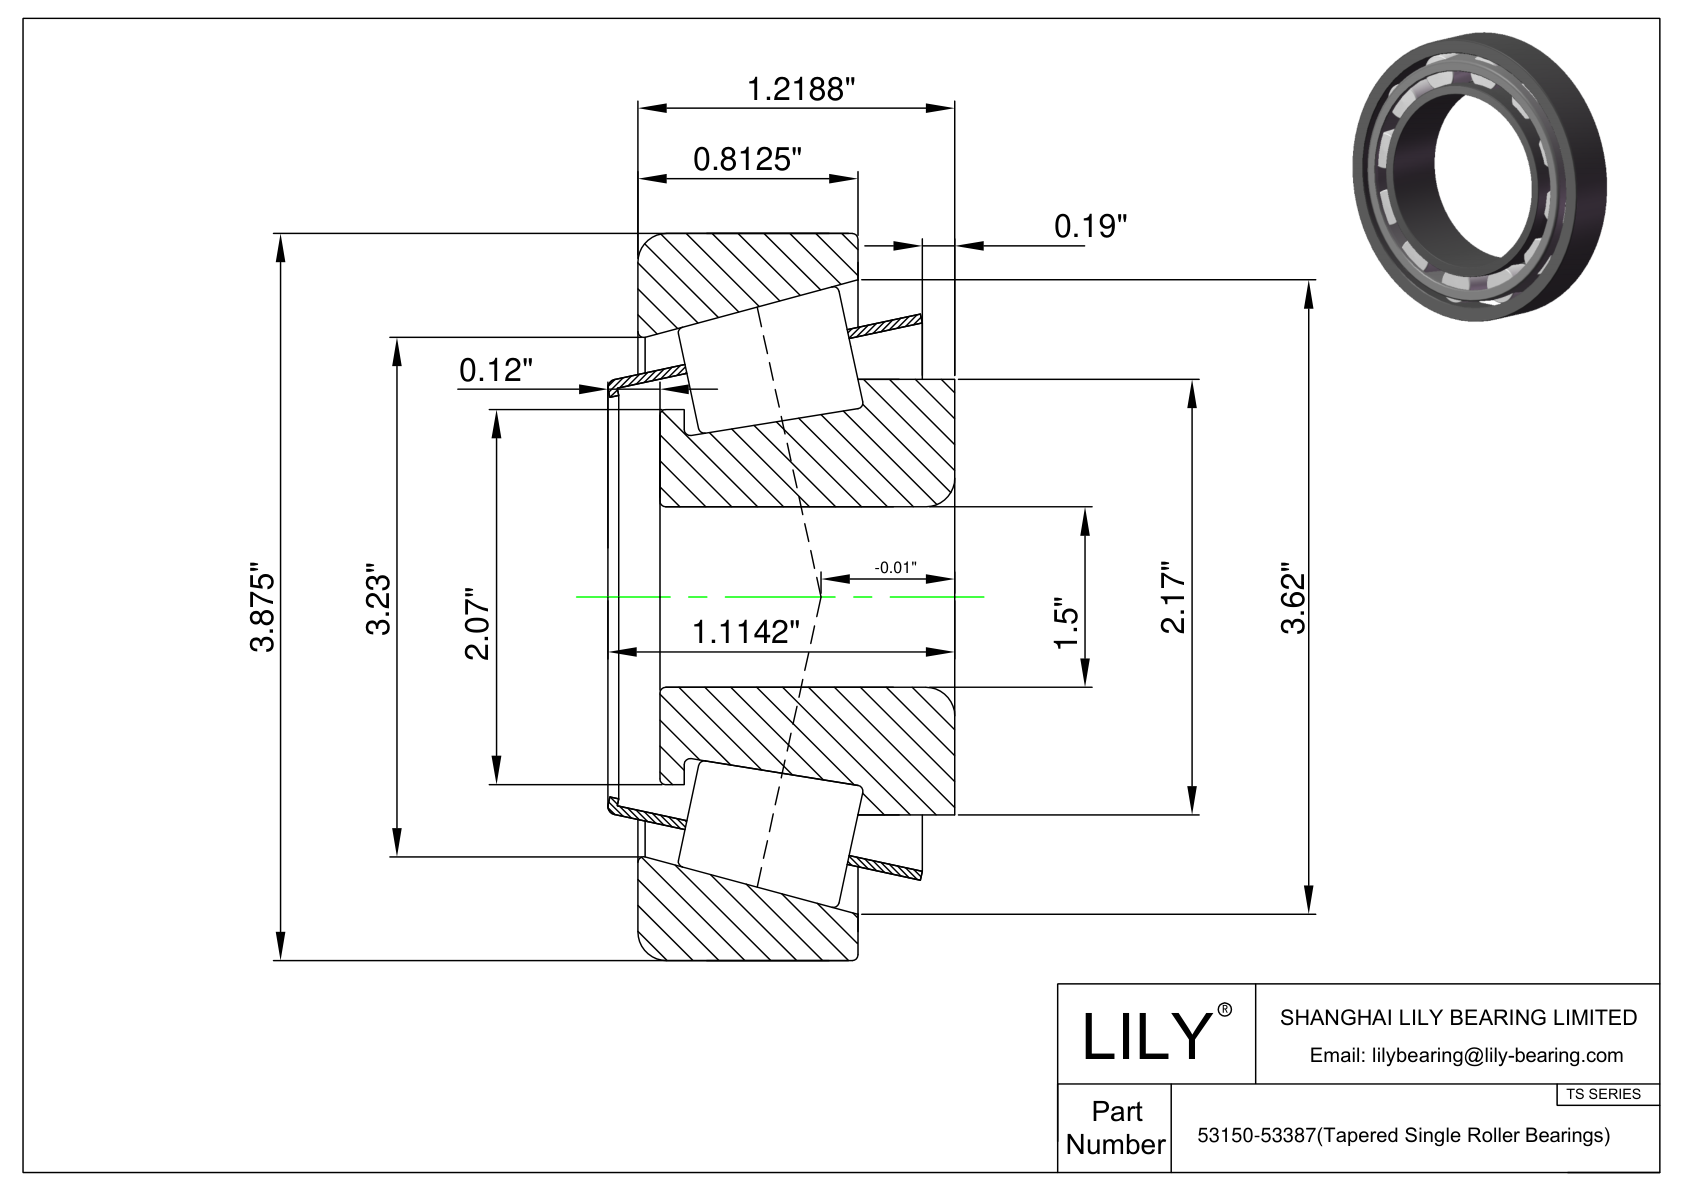 53150-53387 TS (Tapered Single Roller Bearings) (Imperial) cad drawing